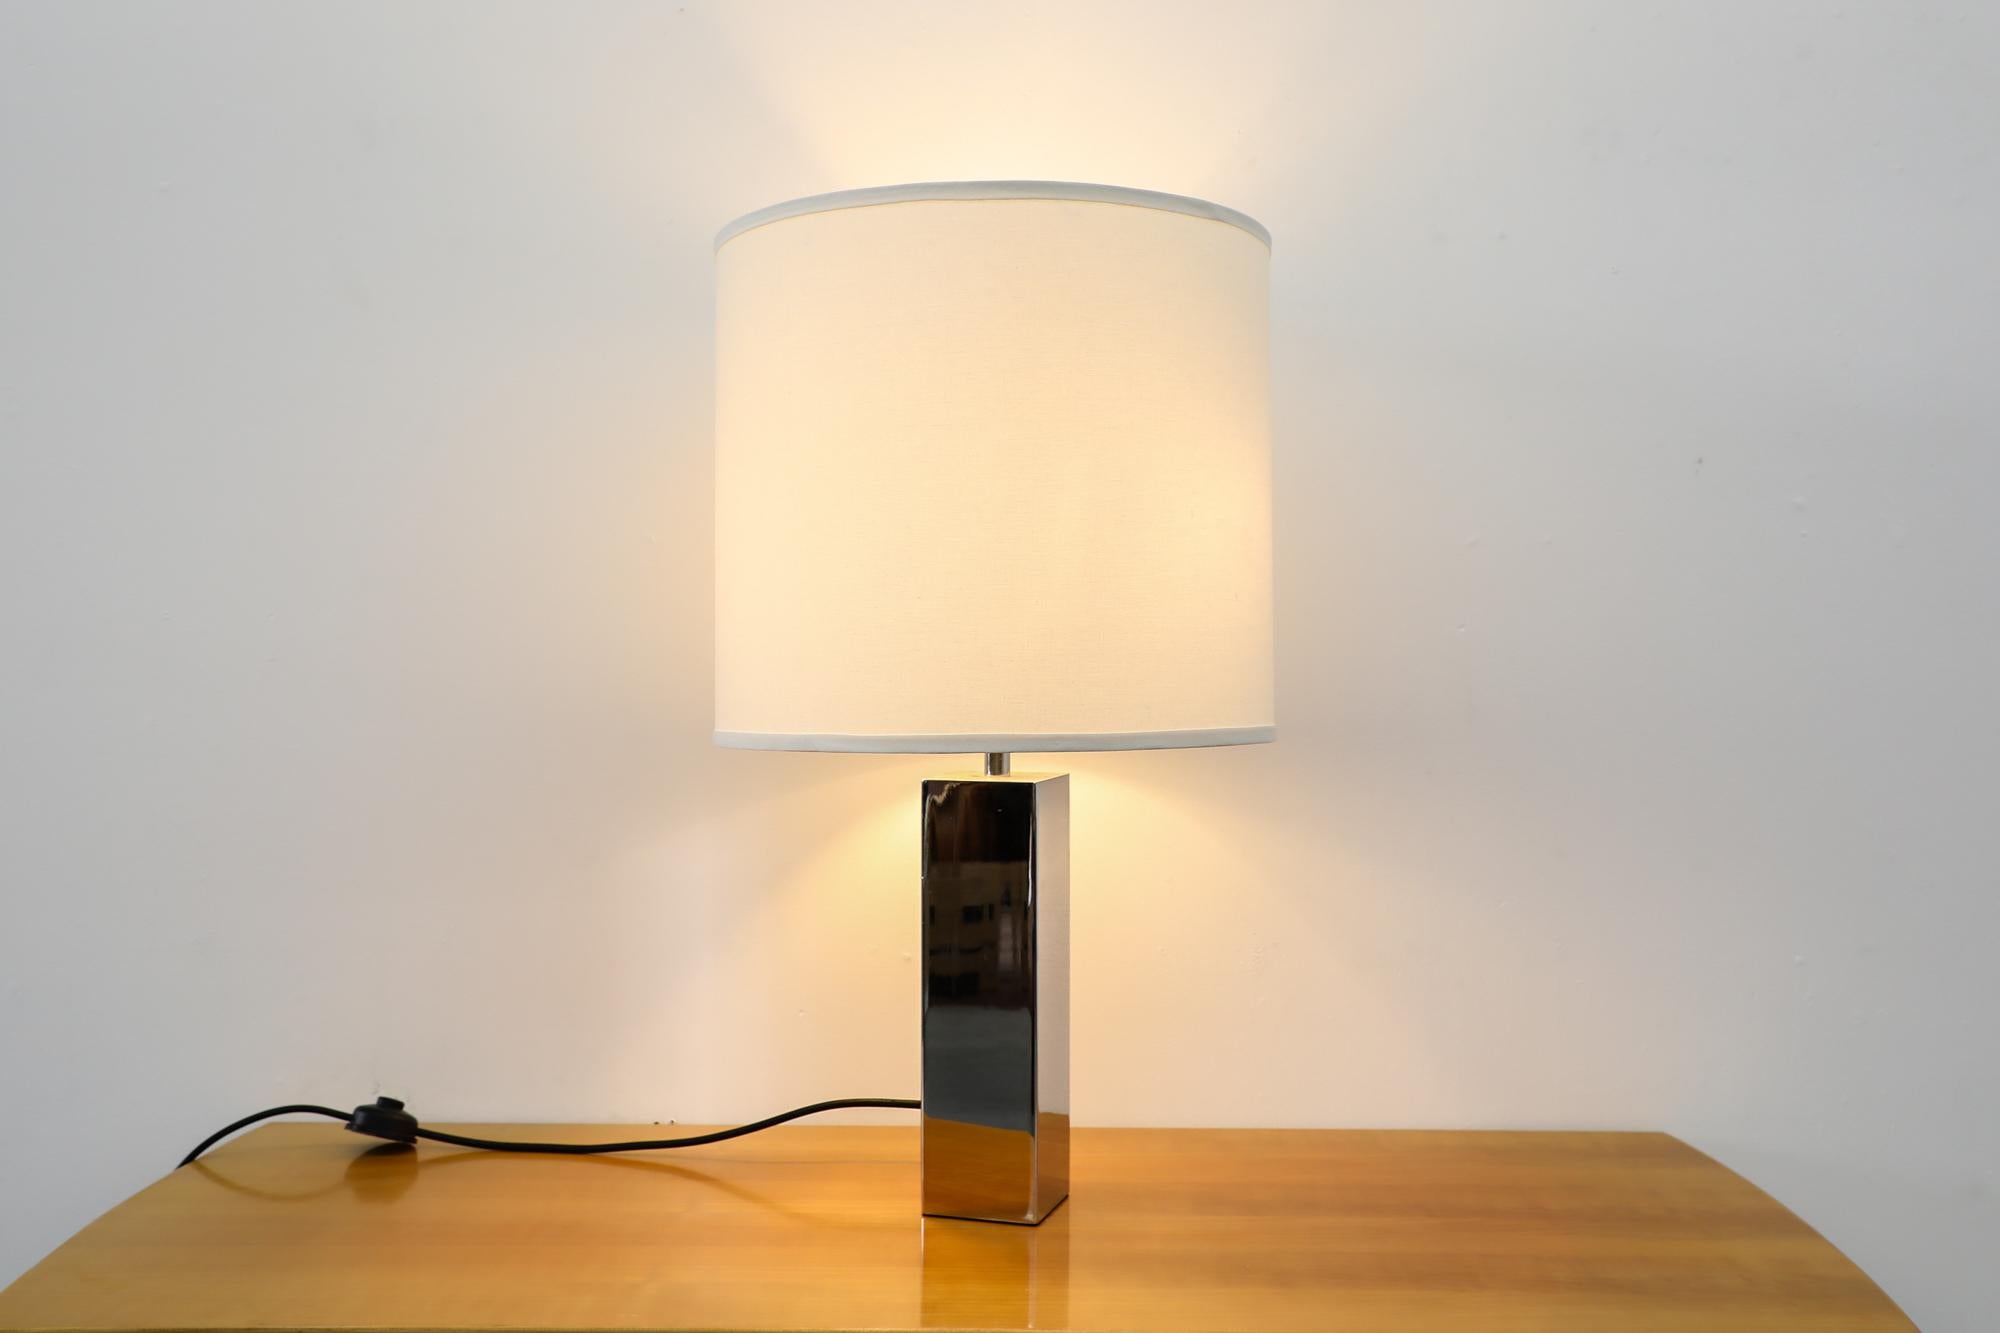 Mid-20th Century Chrome Square Table Lamps by Goffredo Reggiani, Italy, 1960s For Sale